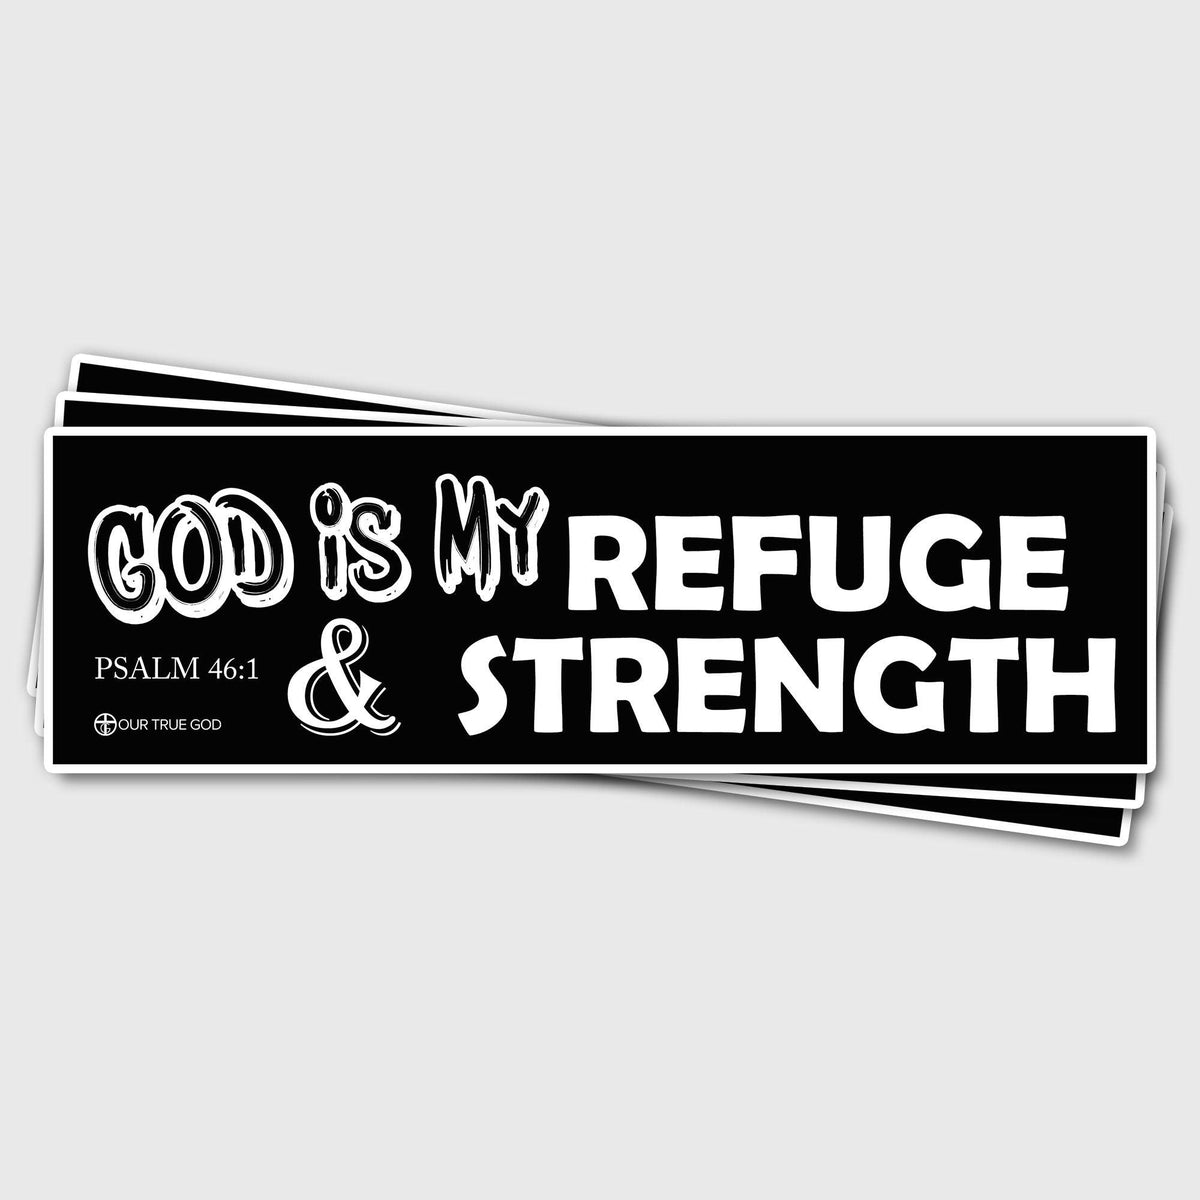 God Is My Refuge And Strength Bumper Stickers